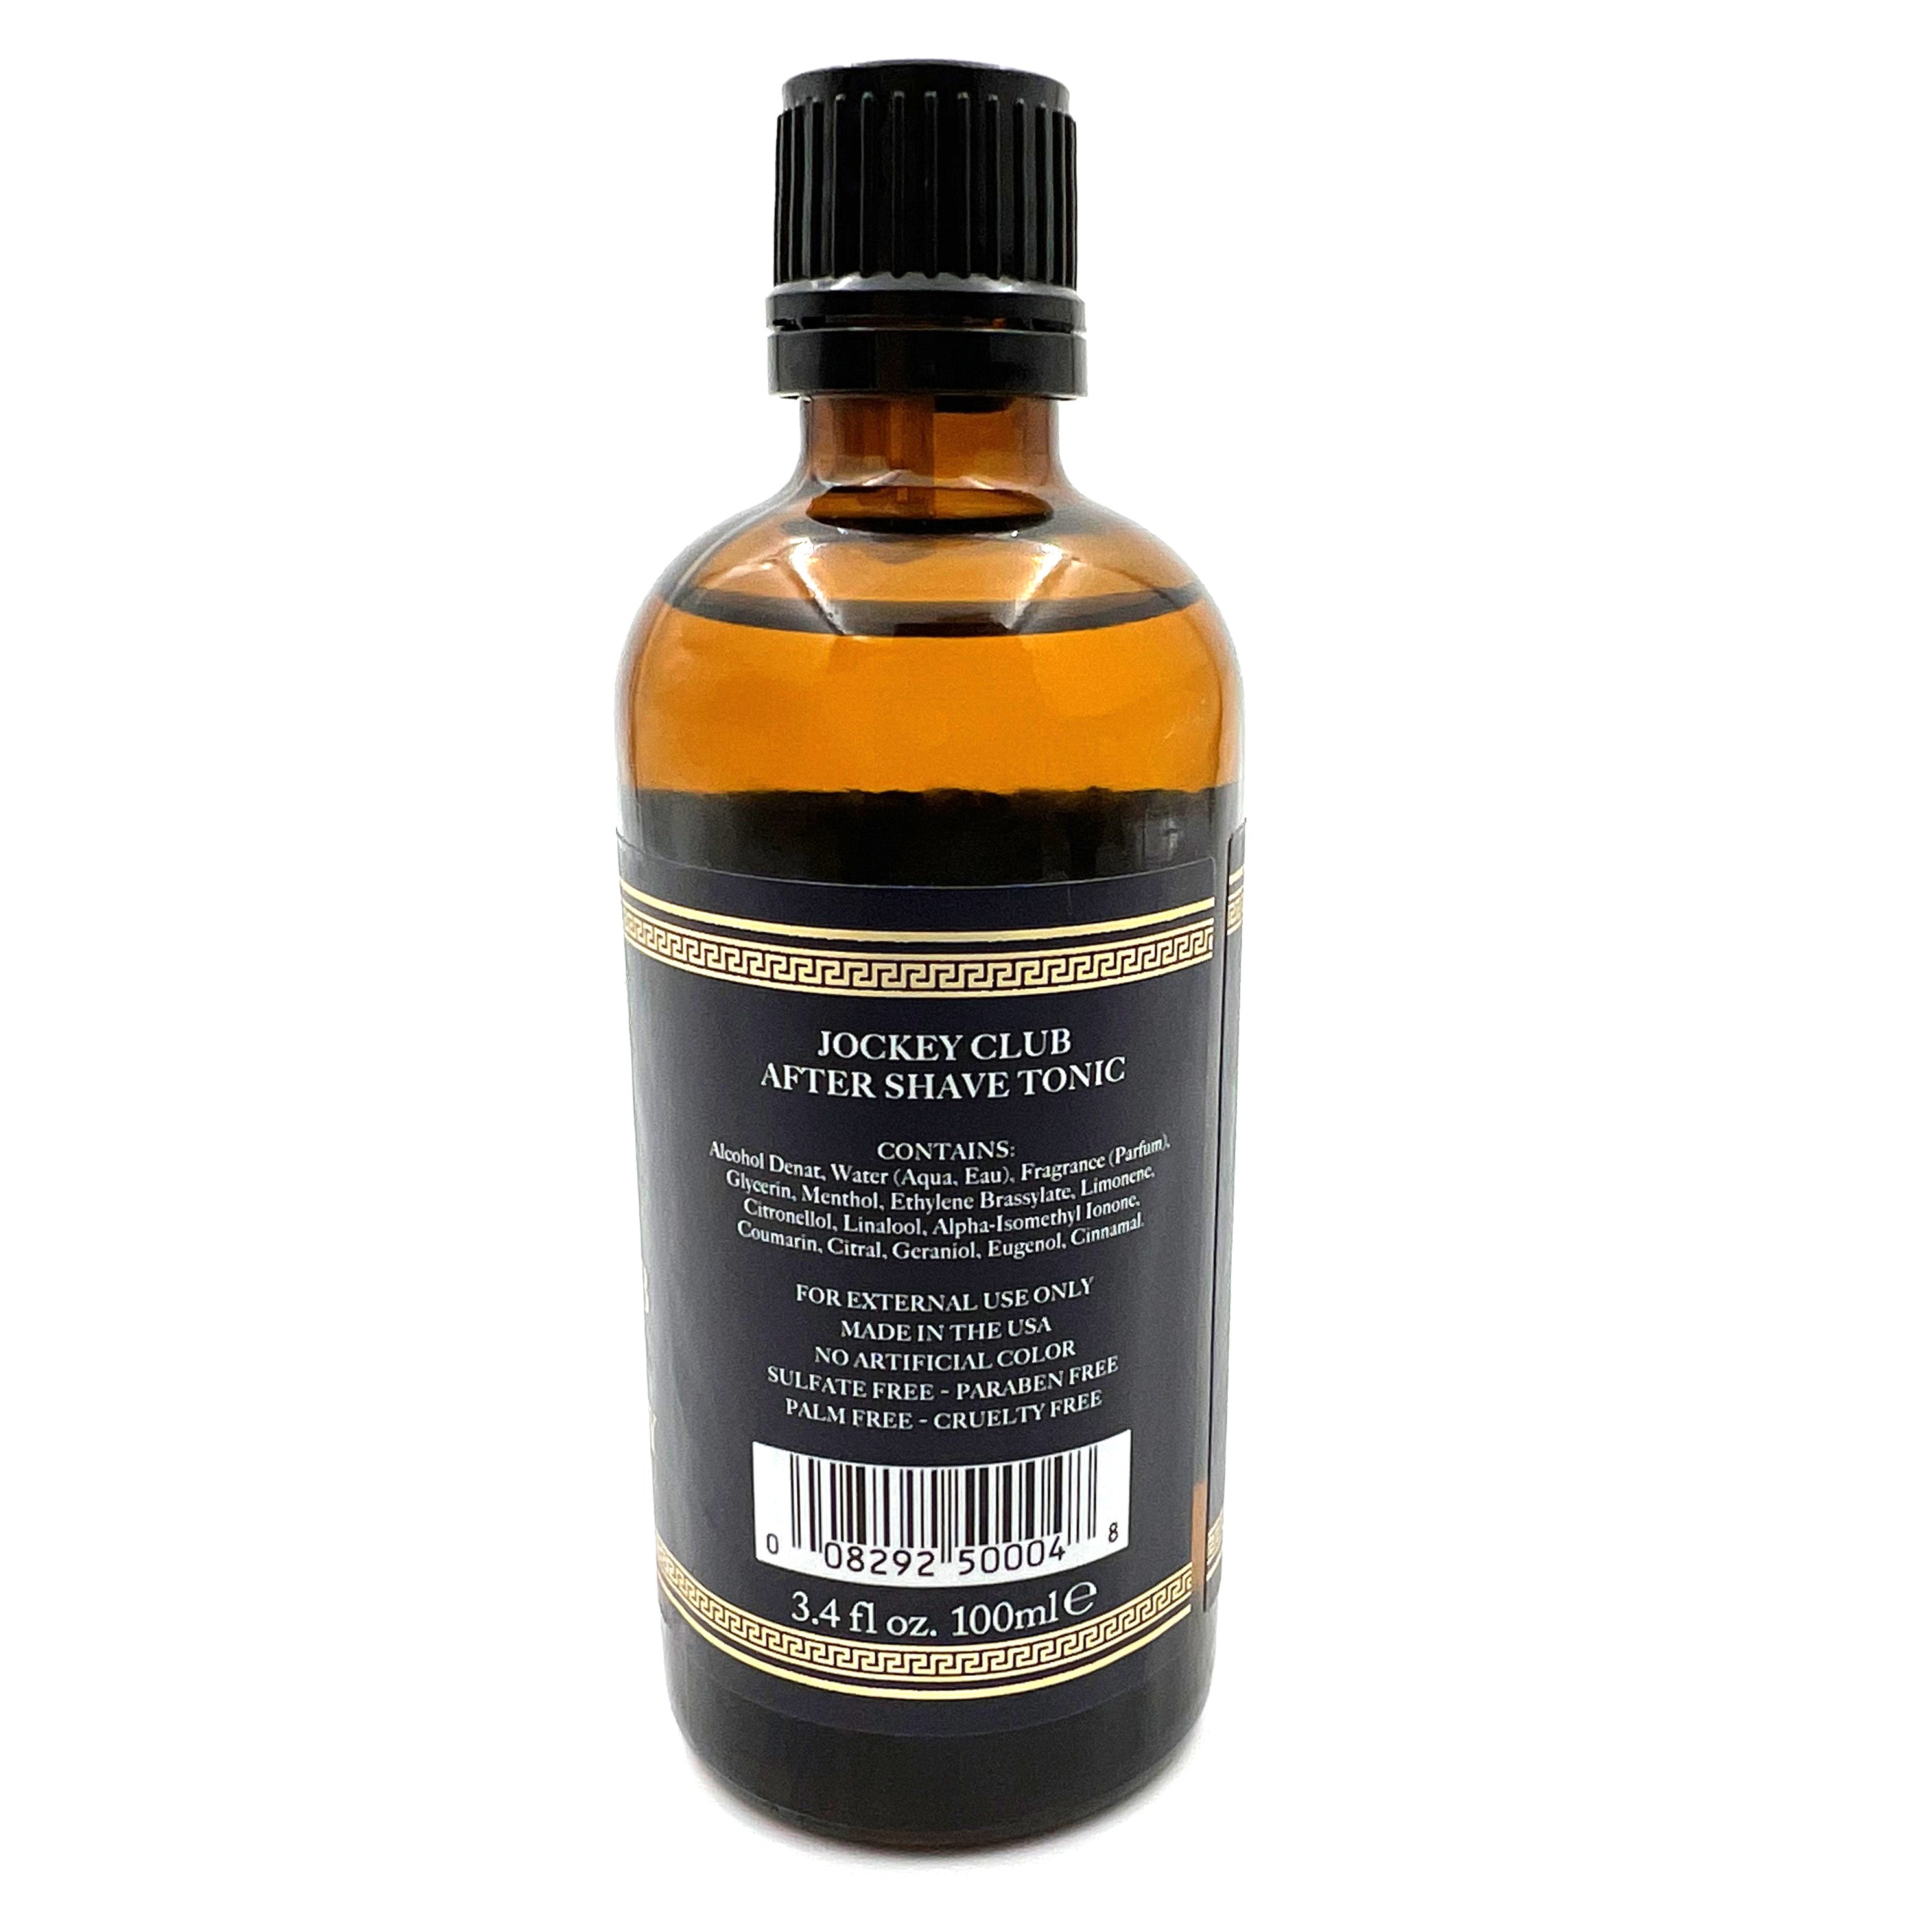 Caswell Massey Heritage Jockey Club After Shave Tonic (100ml/3.4oz)